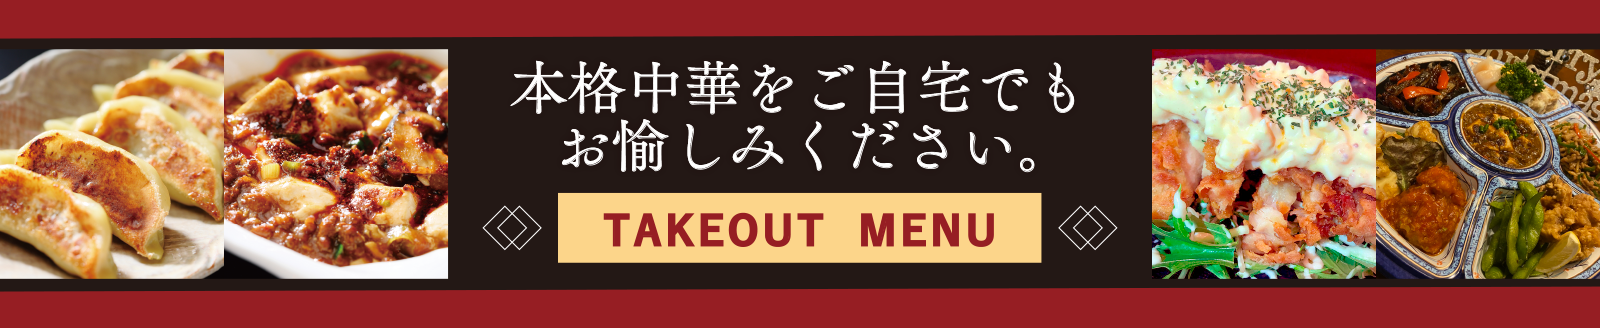 TAKEOUTメニュー